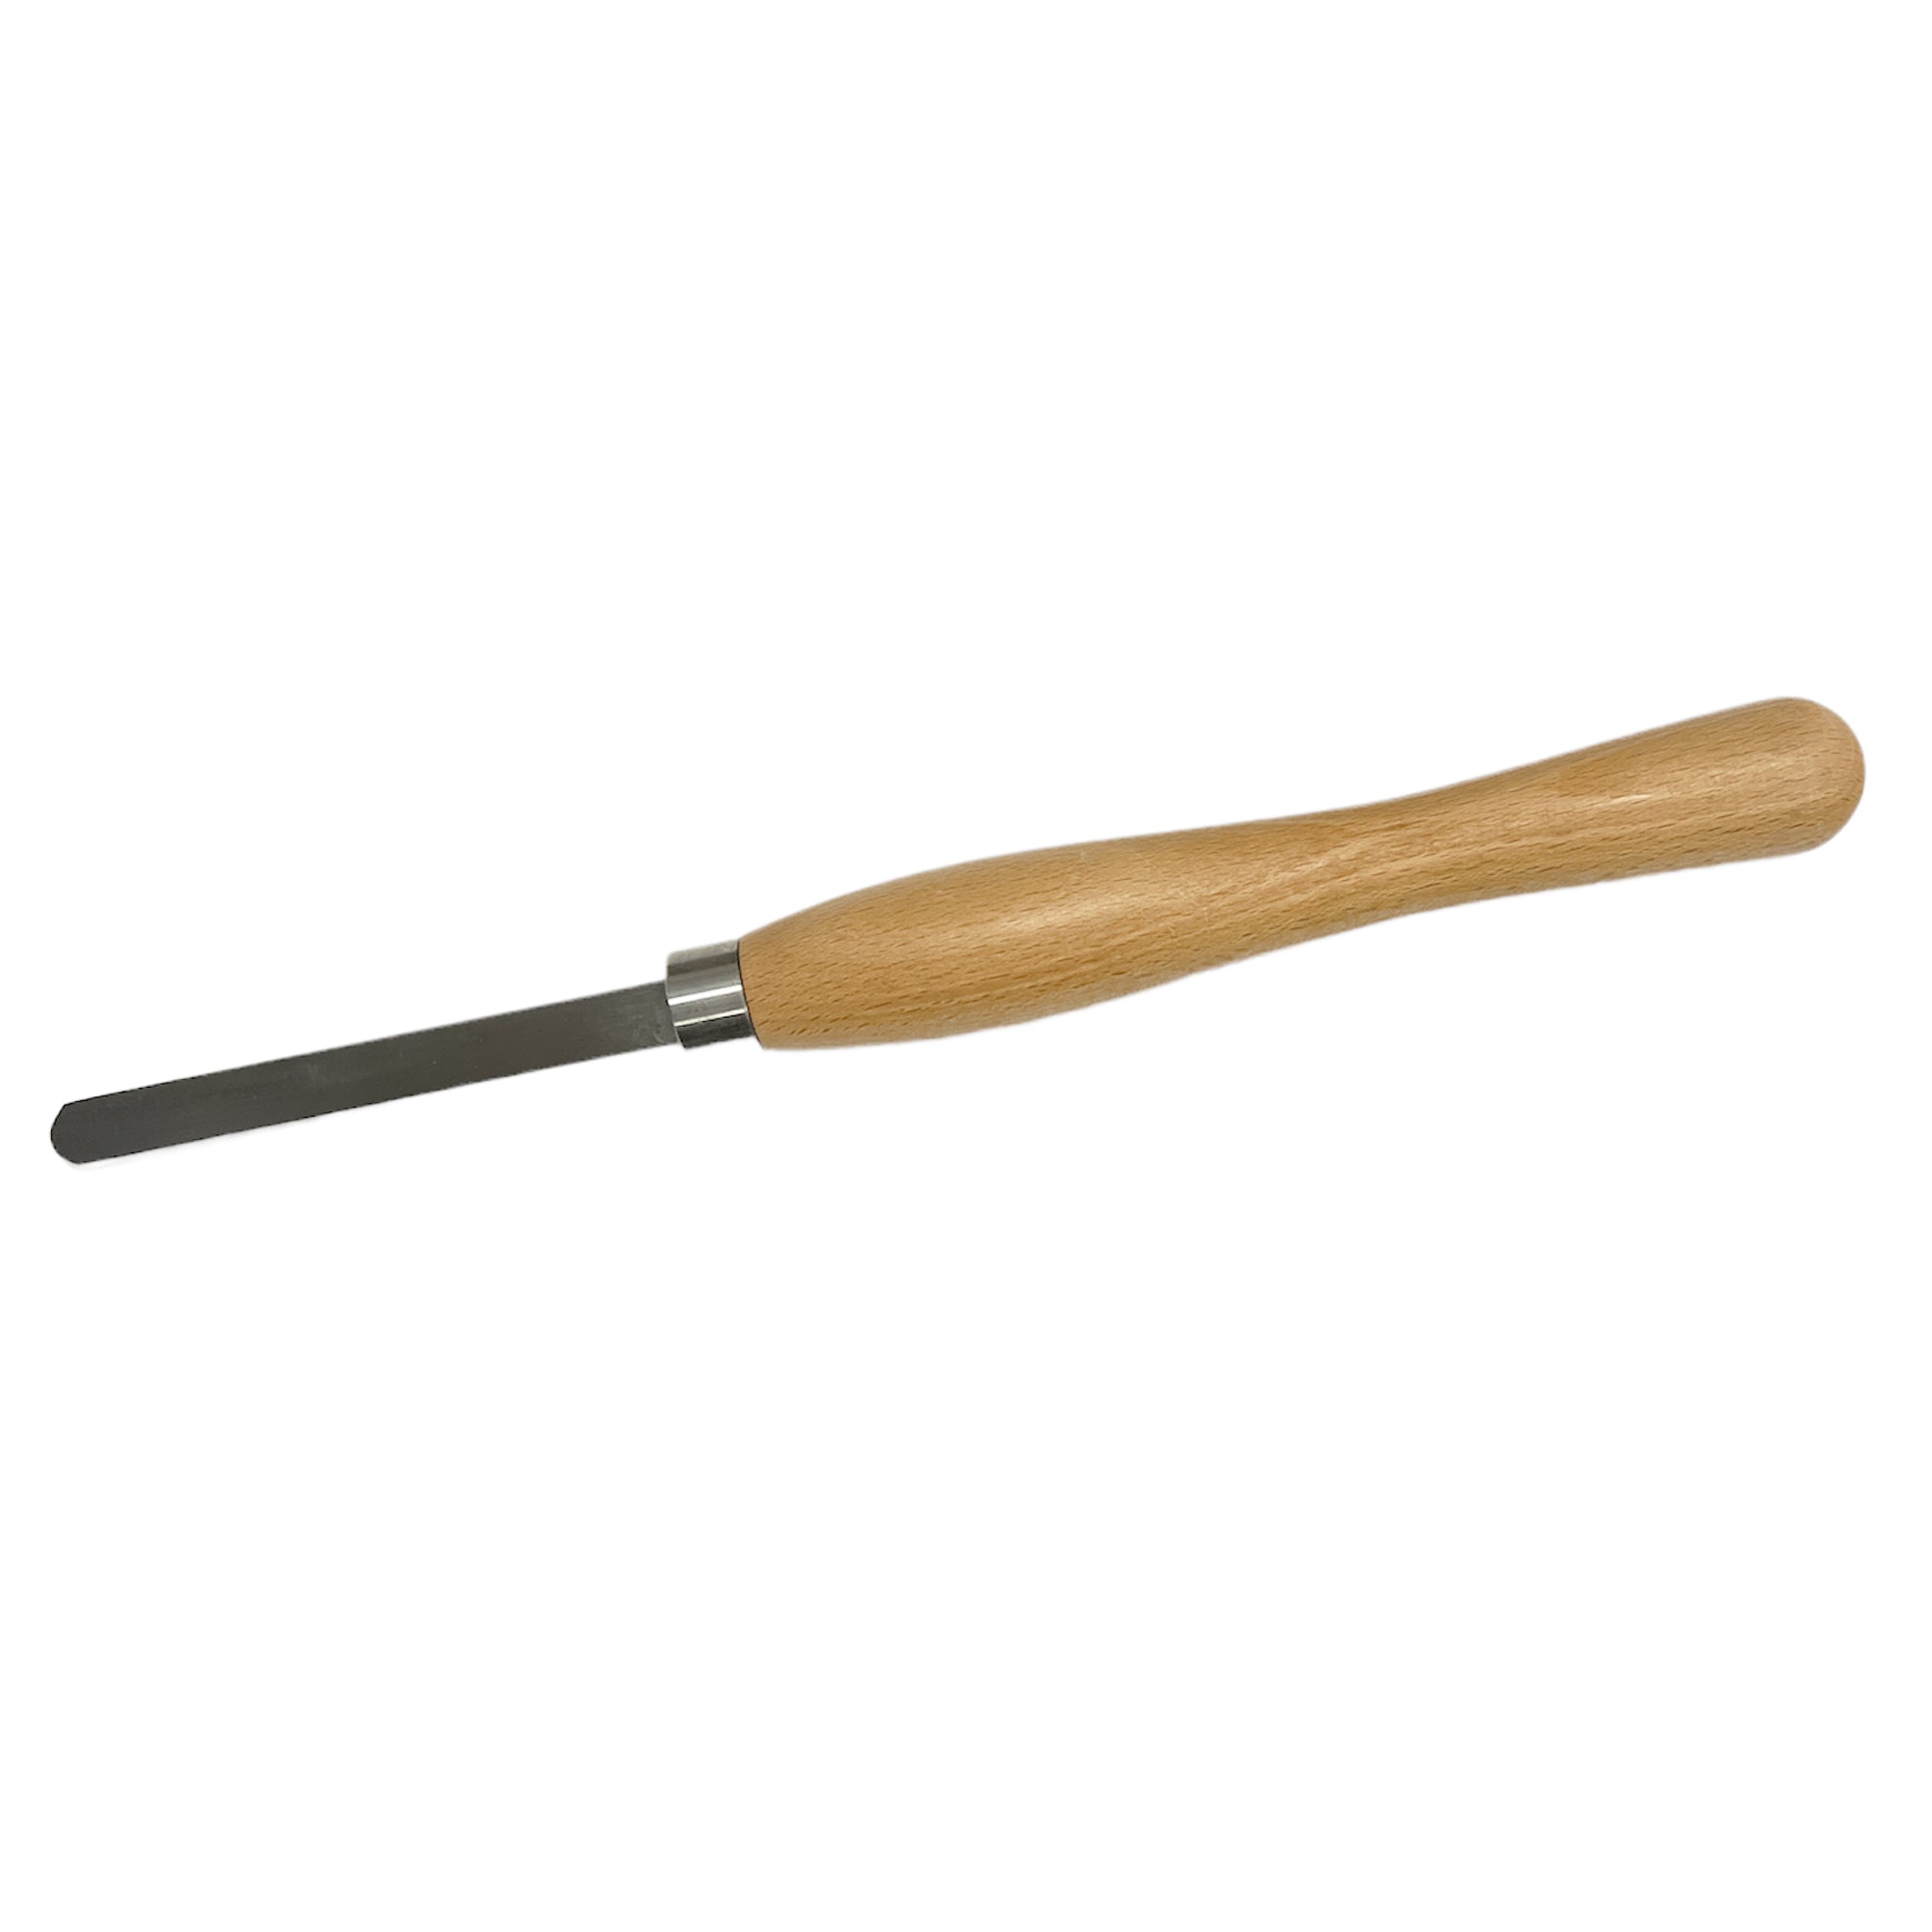 Round Scraper Woodturning Chisel Tool M2 CRYO HSS by Oltre